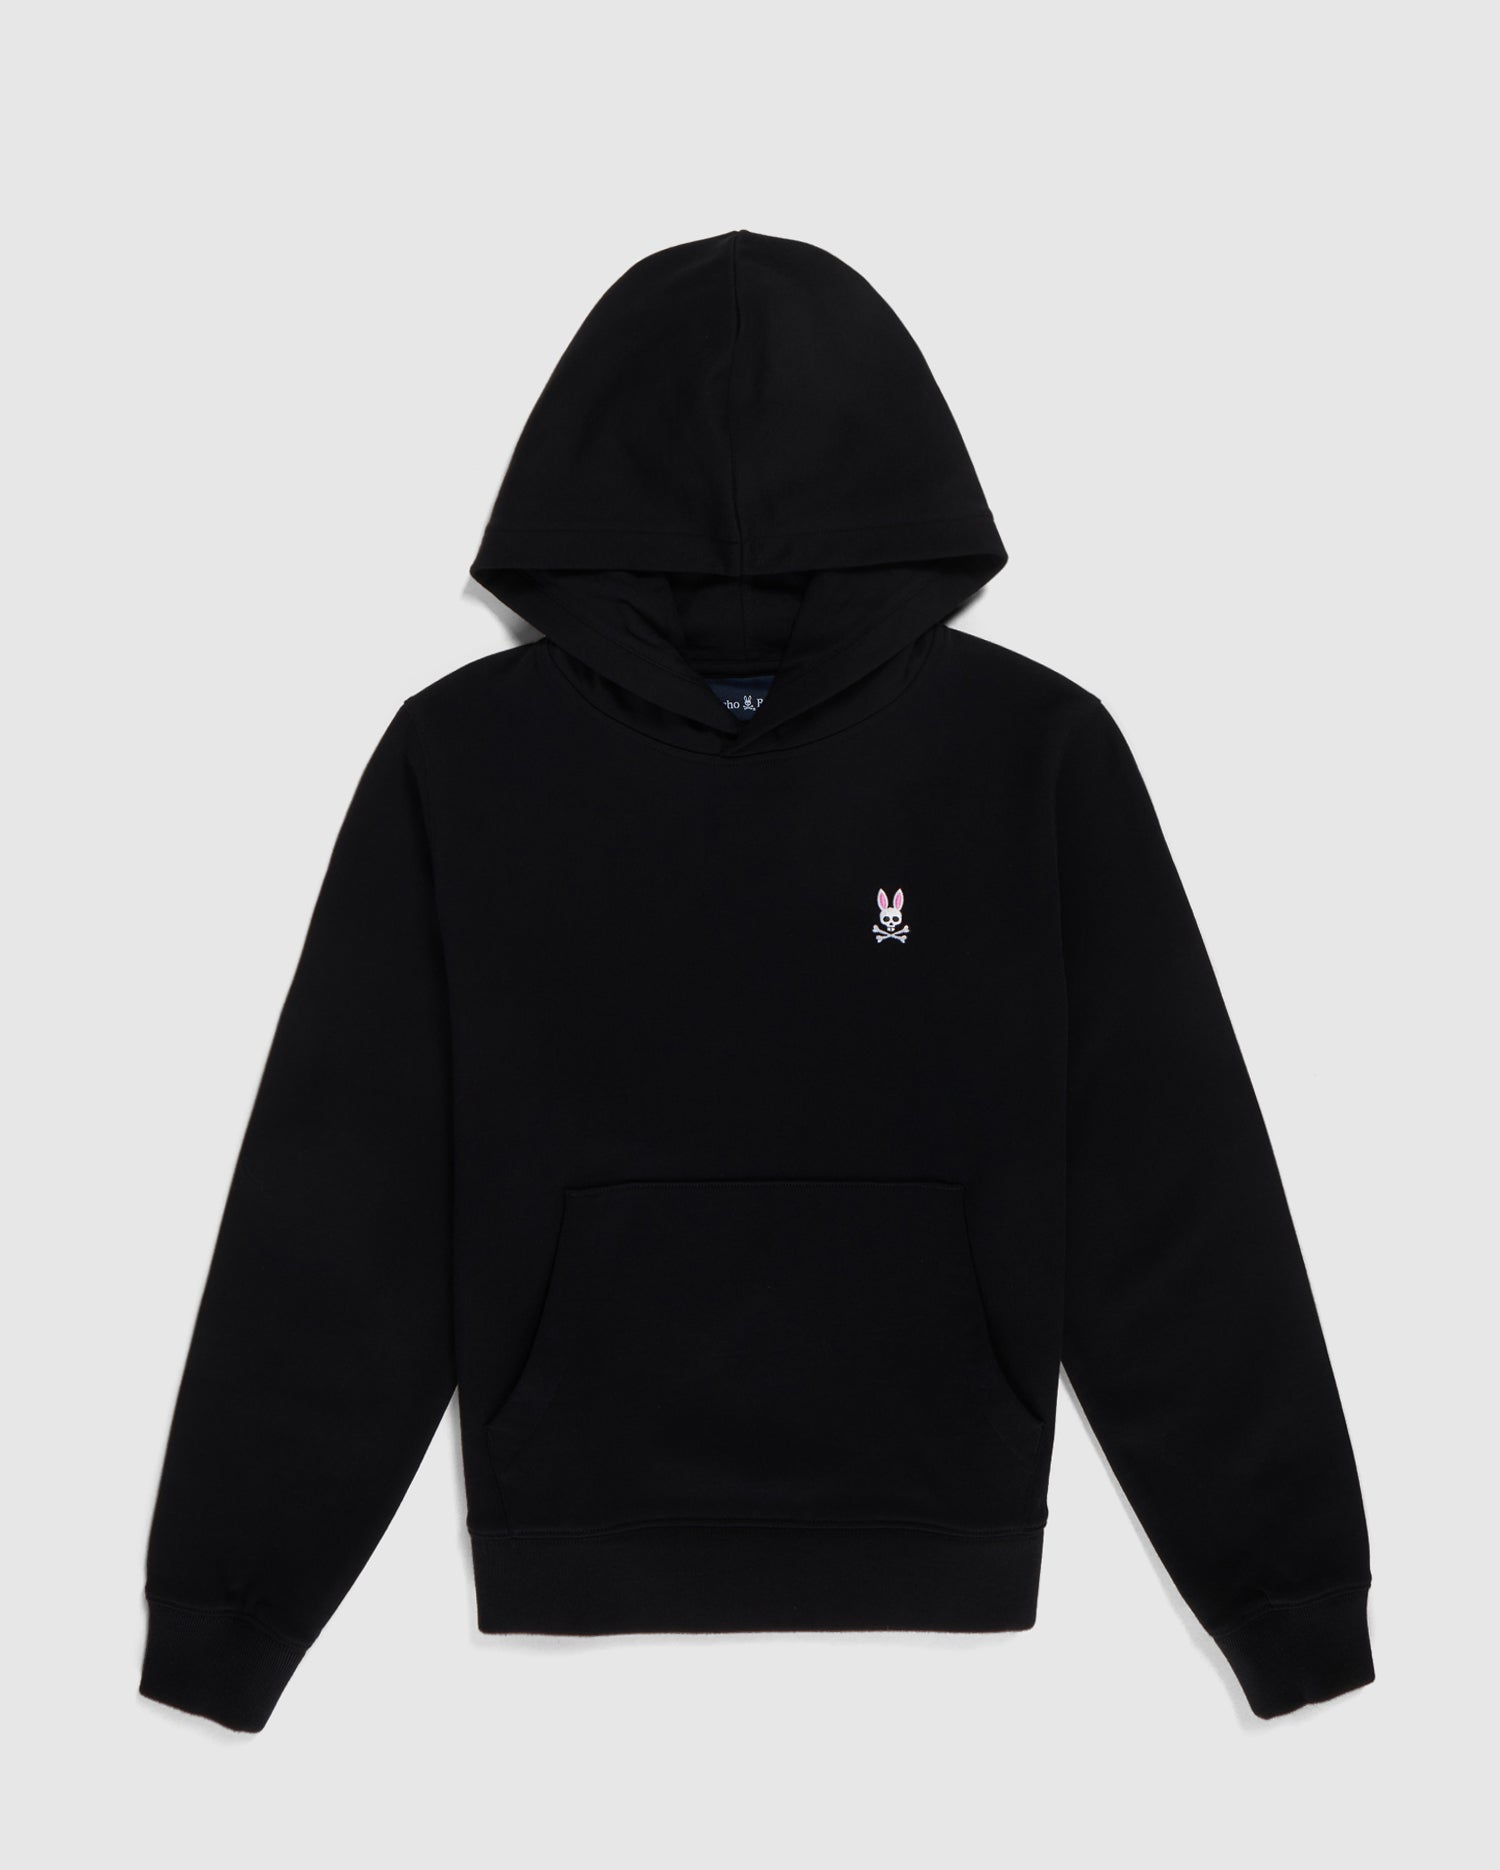 KIDS BLACK FRENCH TERRY PULLOVER HOODIE | PSYCHO BUNNY – Psycho Bunny